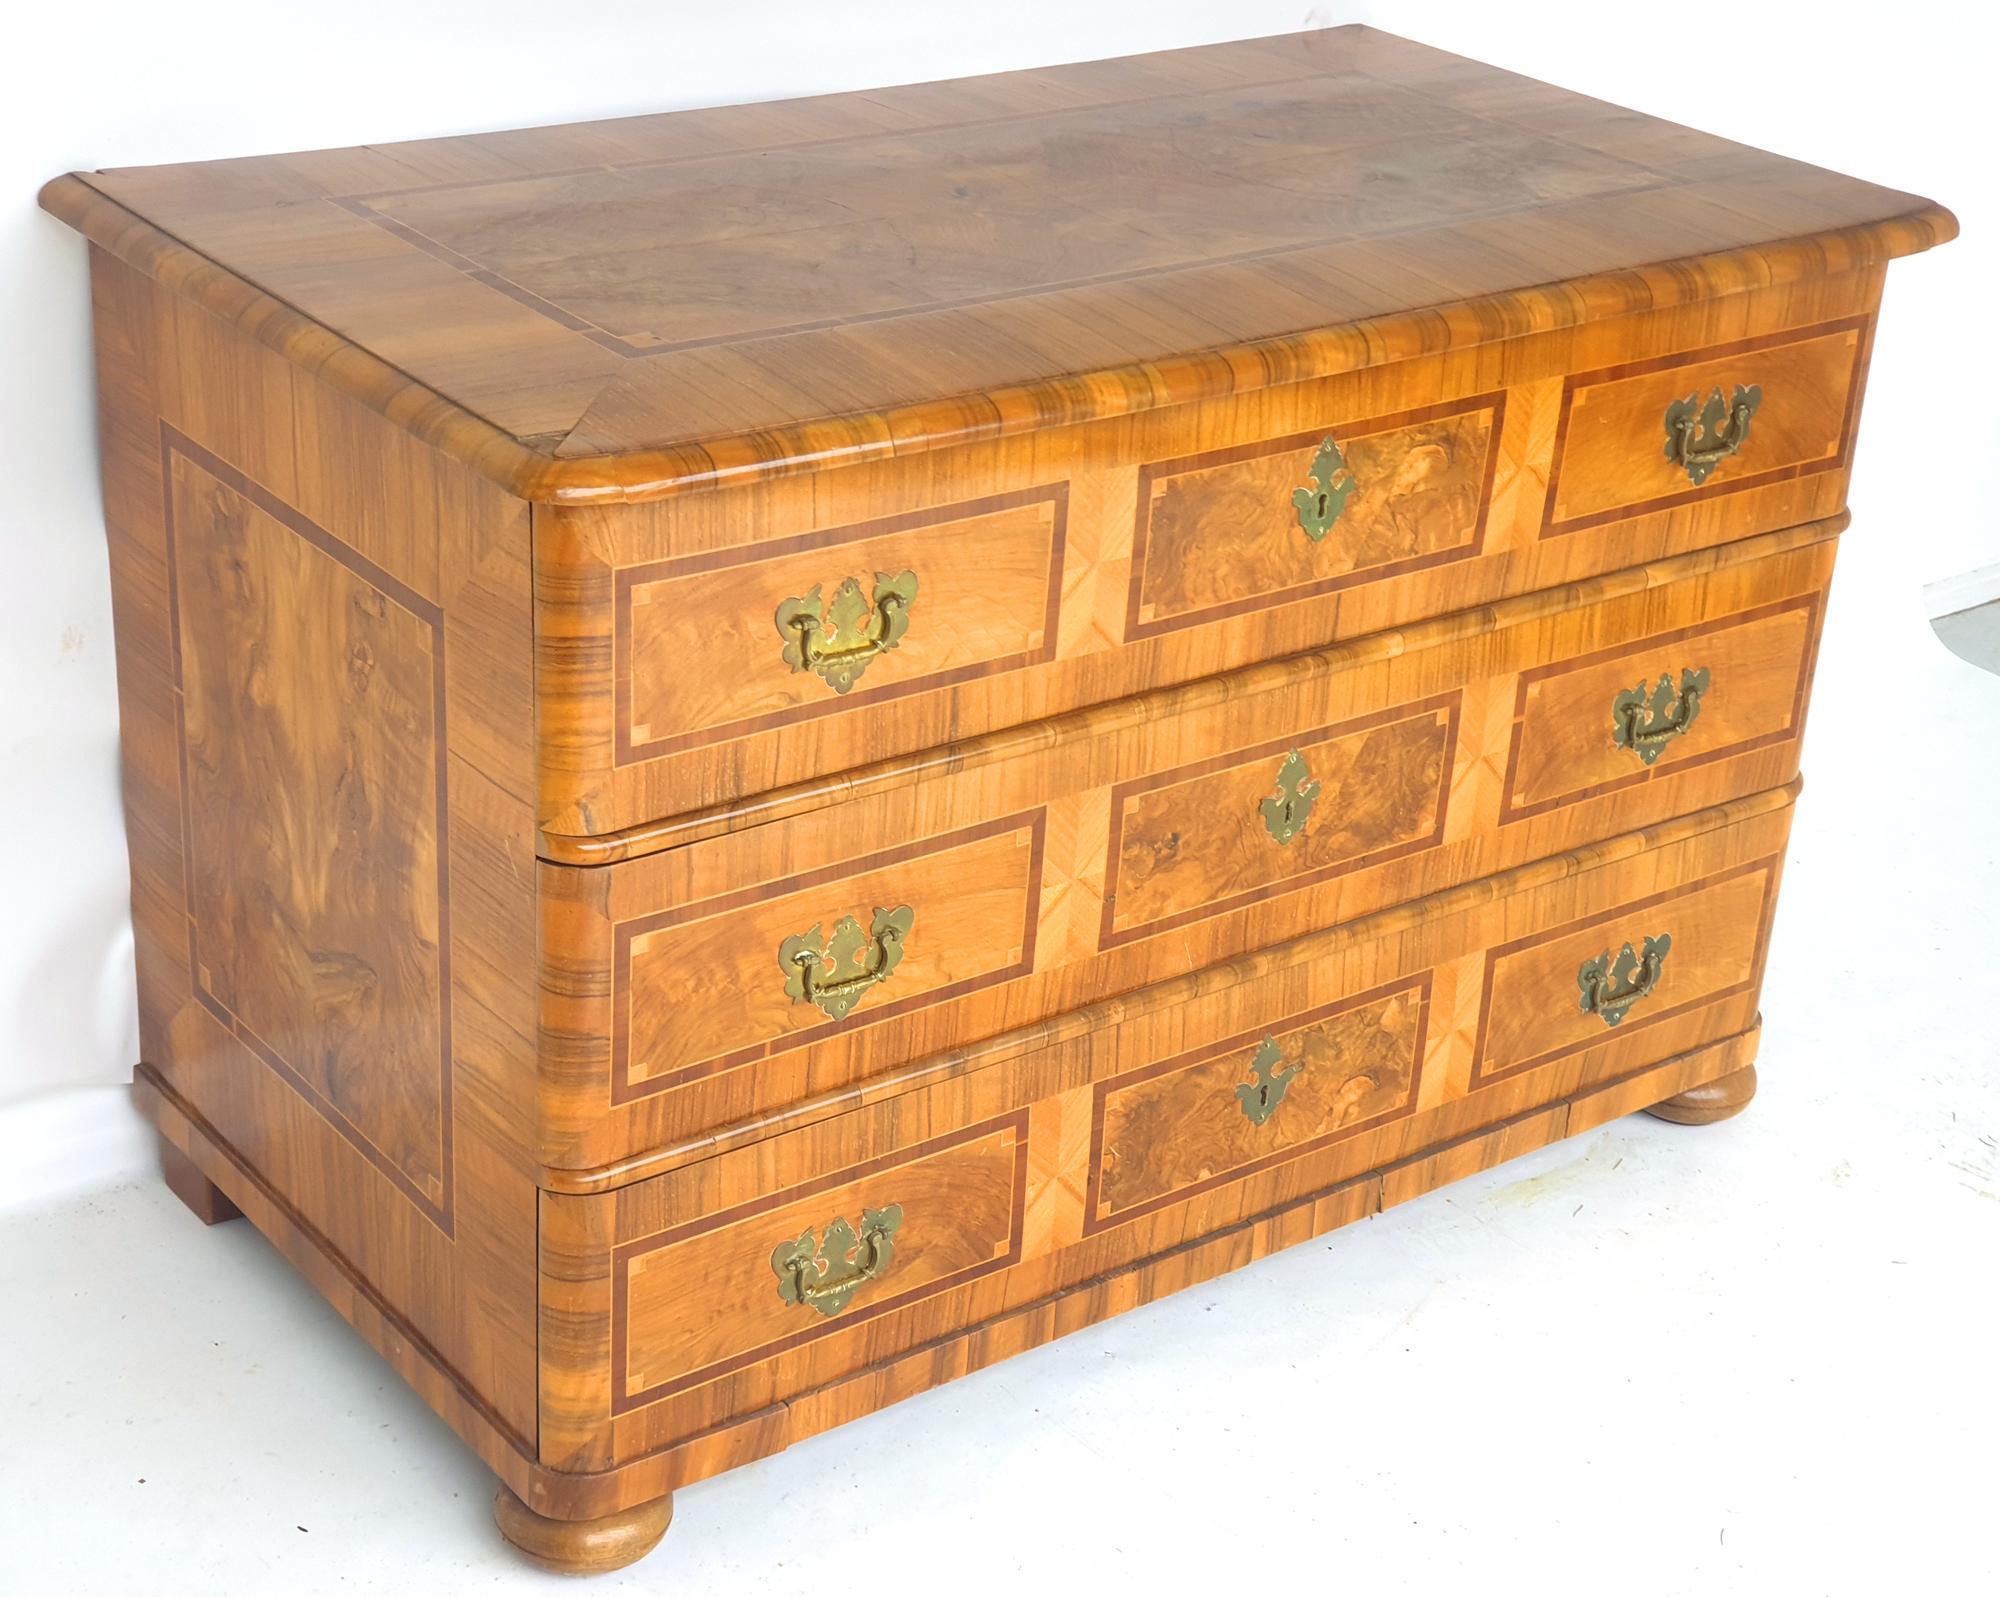 Elegant baroque dresser in walnut and other precious woods. 1770s

Pressed ball feet, above a body with rounded corners and three drawers. The drawers are divided into three sections by ribbon and thread inlays. Original fittings and locks. Cover